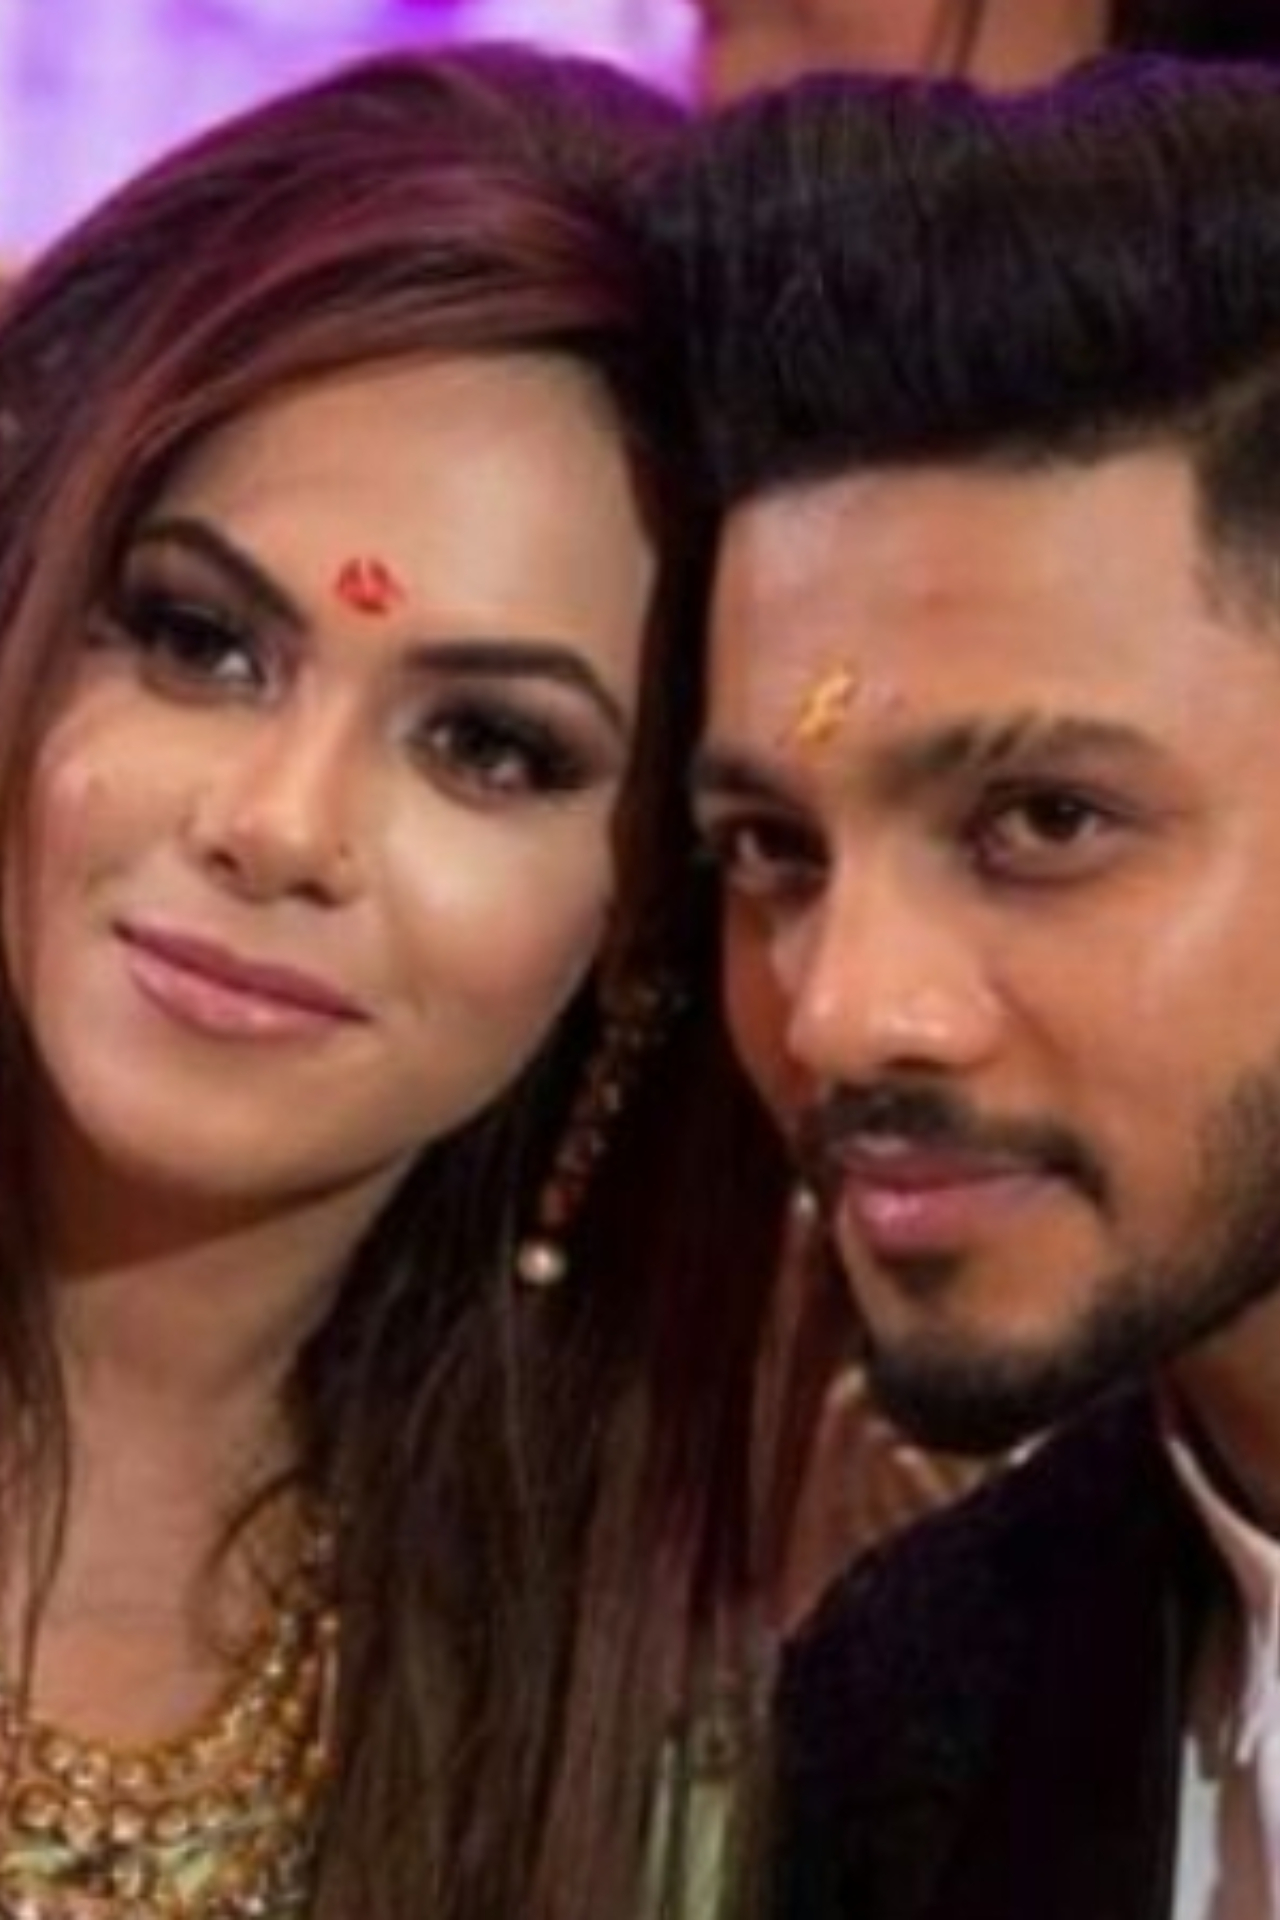 Reportedly,&amp;nbsp;Raftaar met Komal&amp;nbsp;in 2011 and fell in love at first sight.&amp;nbsp;